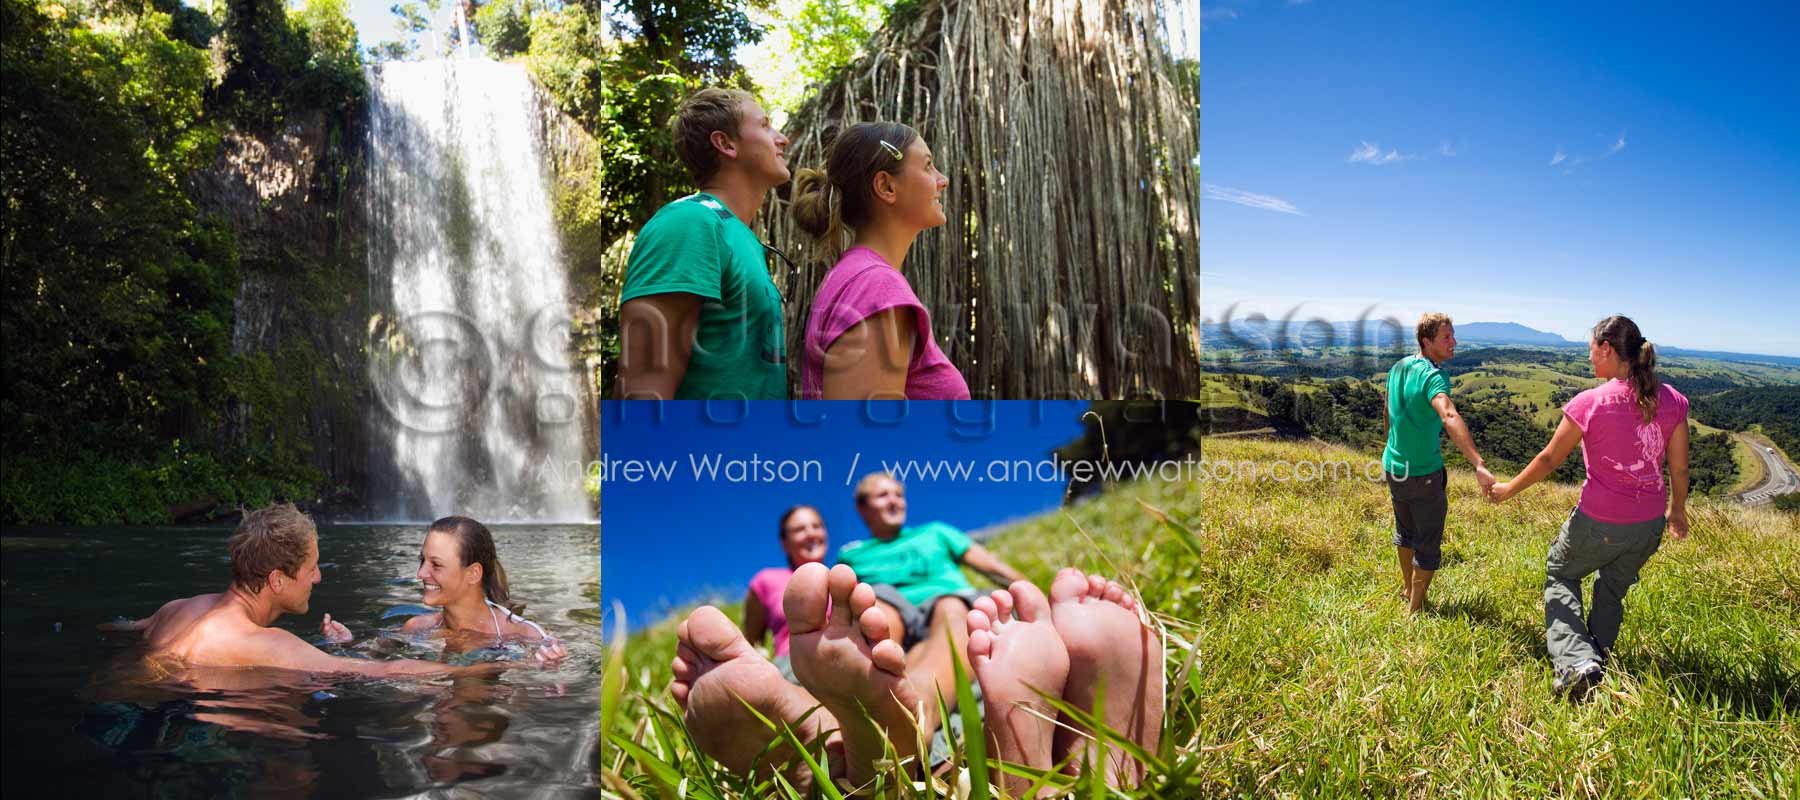 Tourism & Lifestyle Photography - Images of couple exploring the sights of the Atherton Tablelands, North Queensland